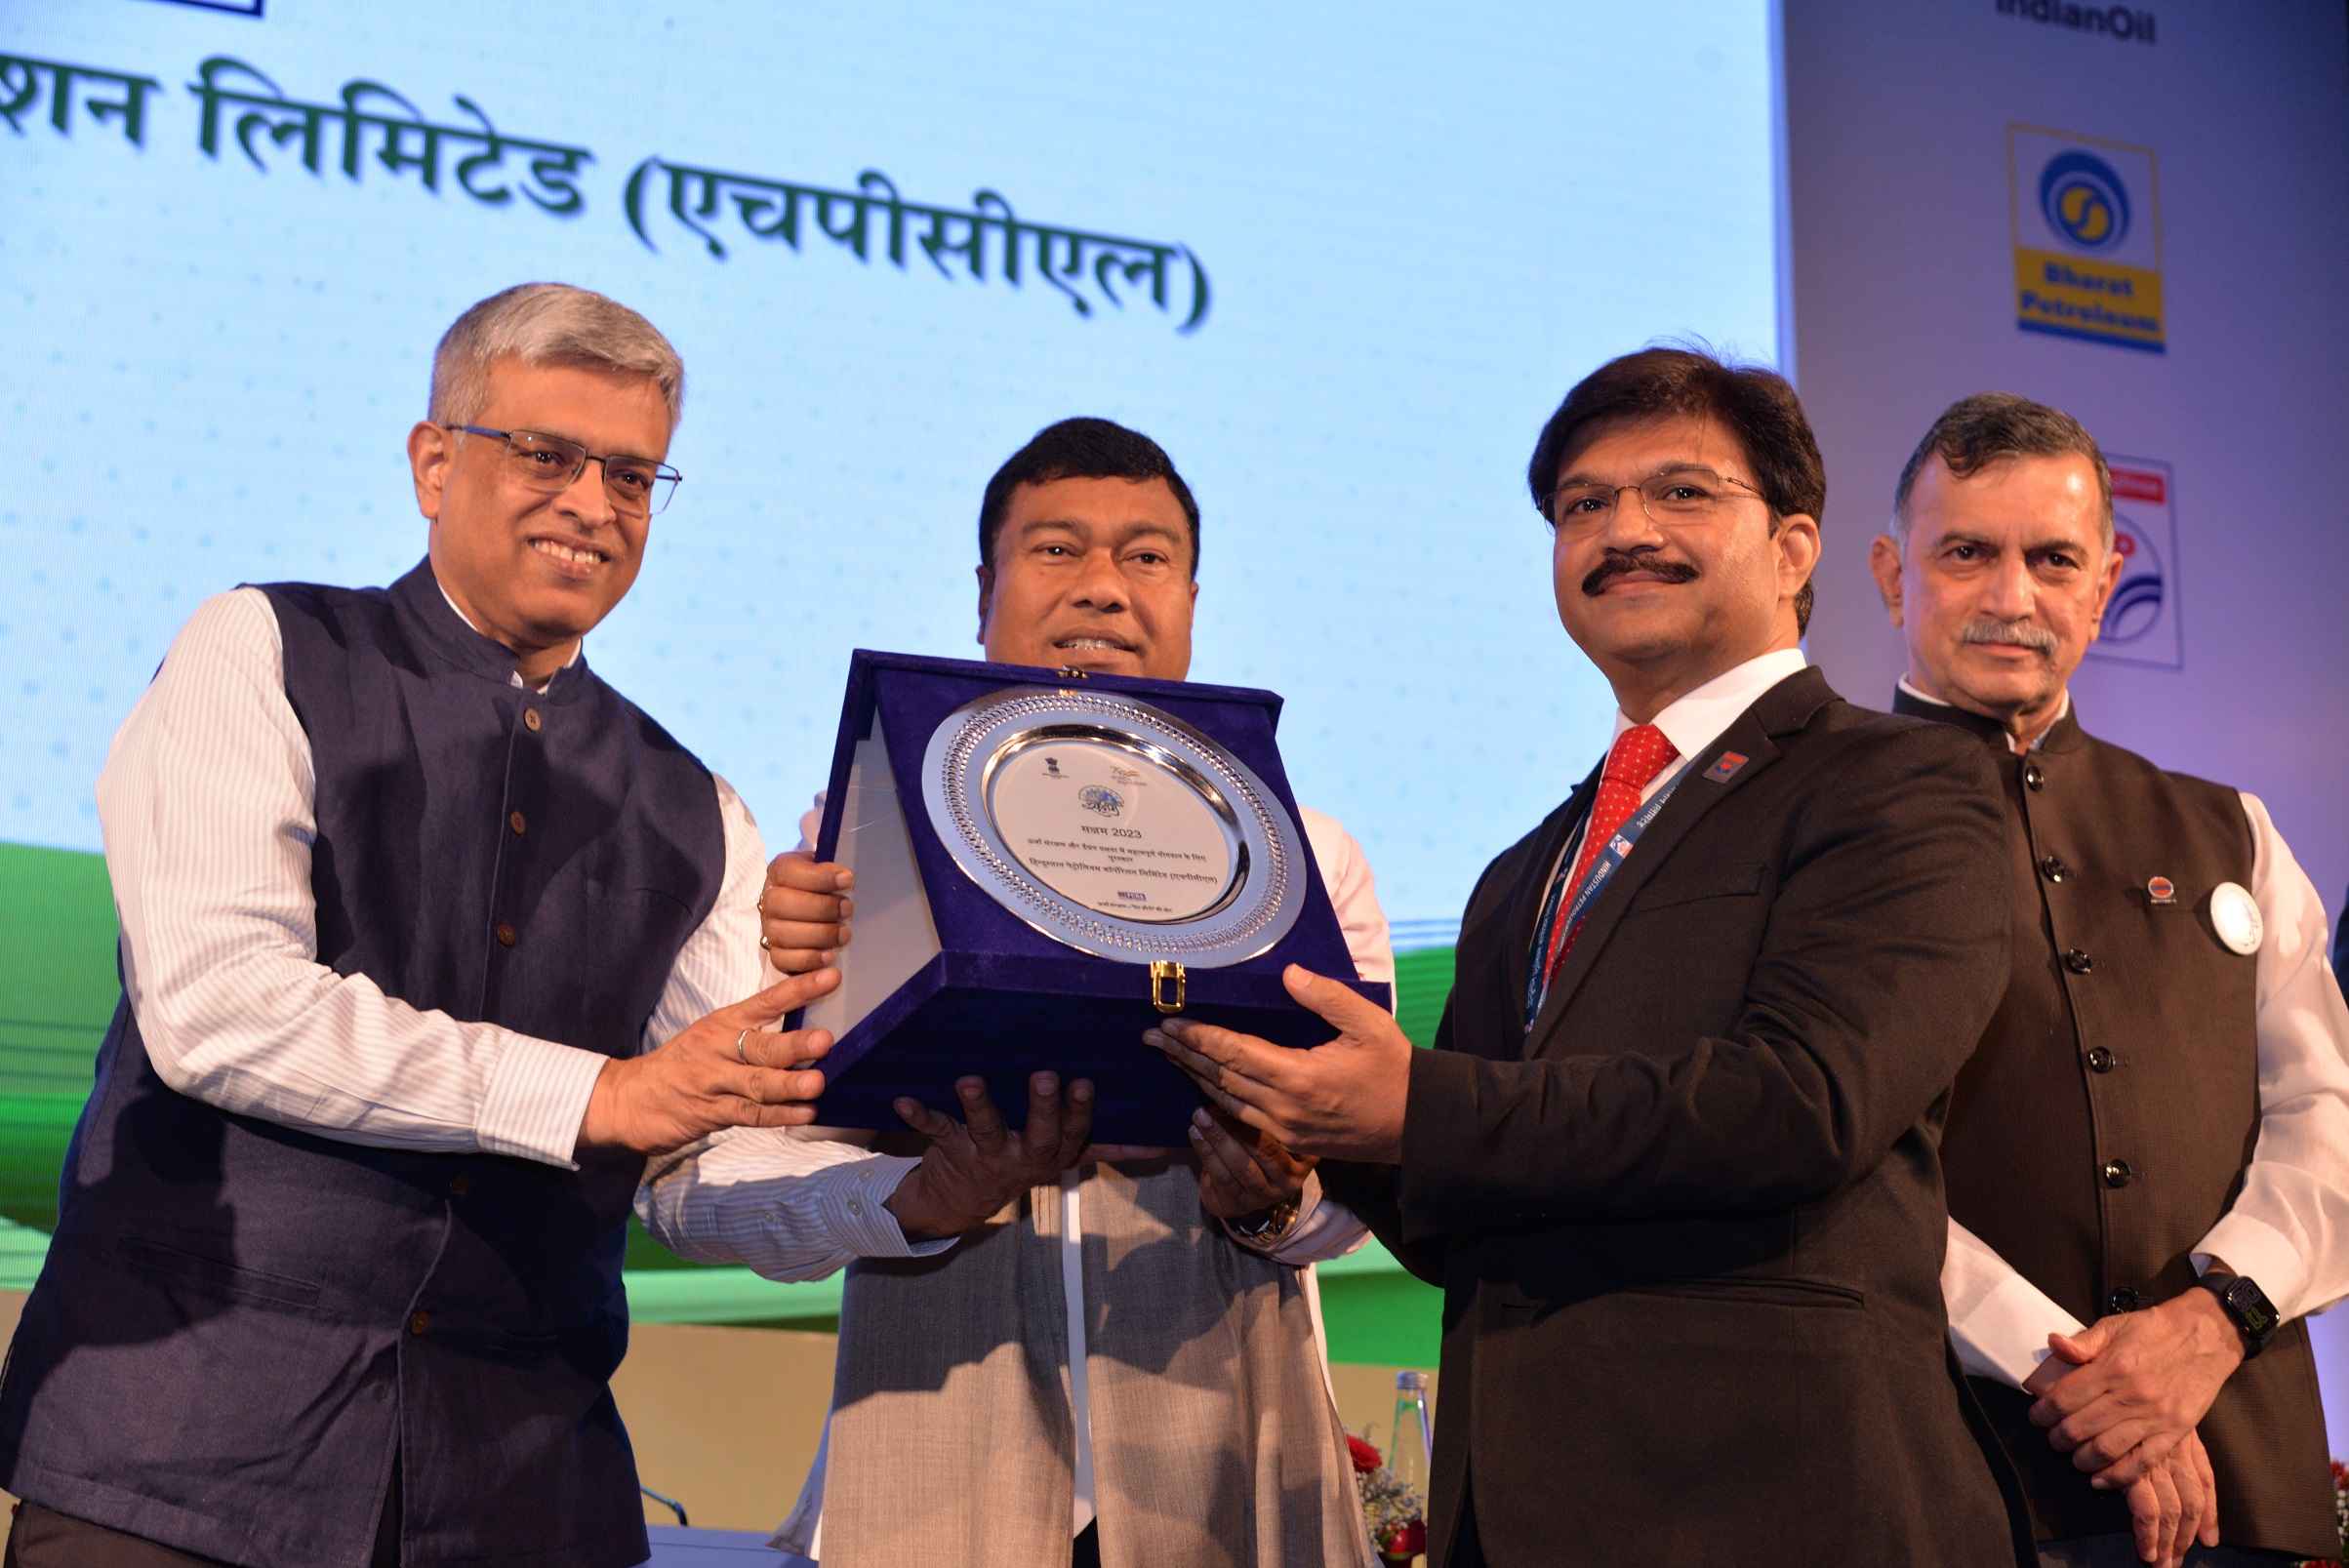 Director Marketing, HPCL Receives Award for Fuel Conservation by PCRA on behalf of HPCL